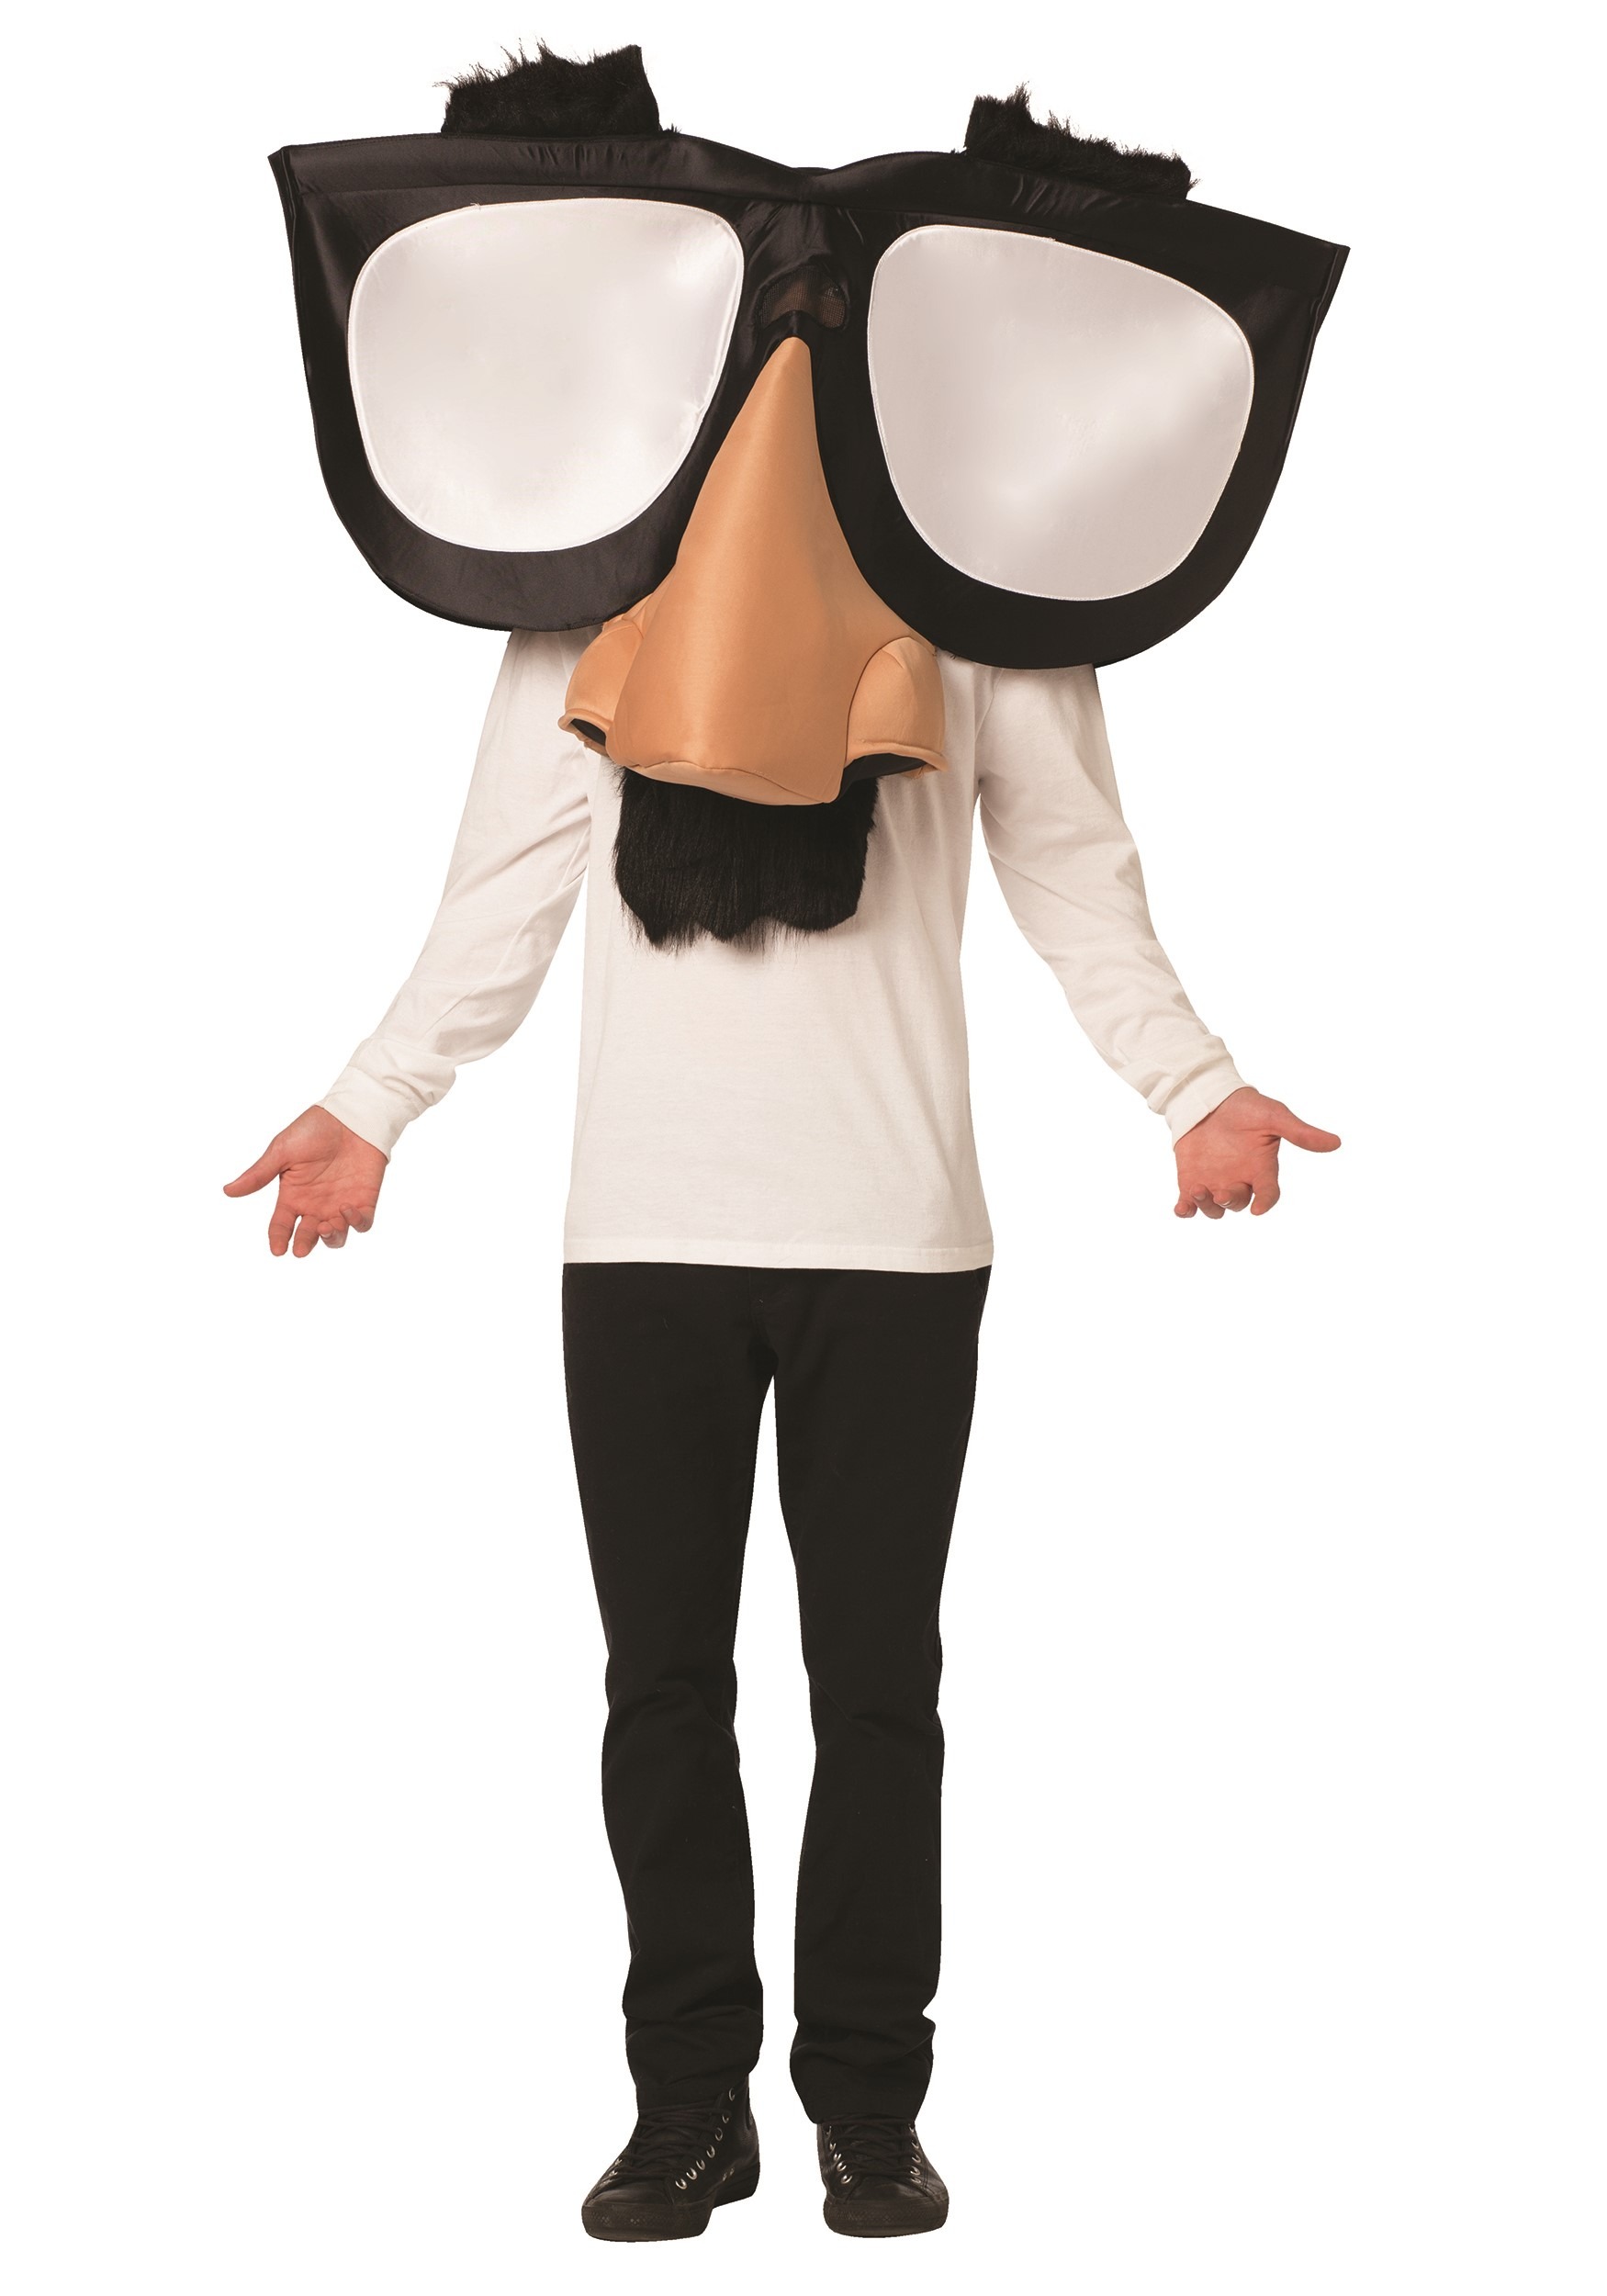 The Adult Funny Nose Glasses Costume